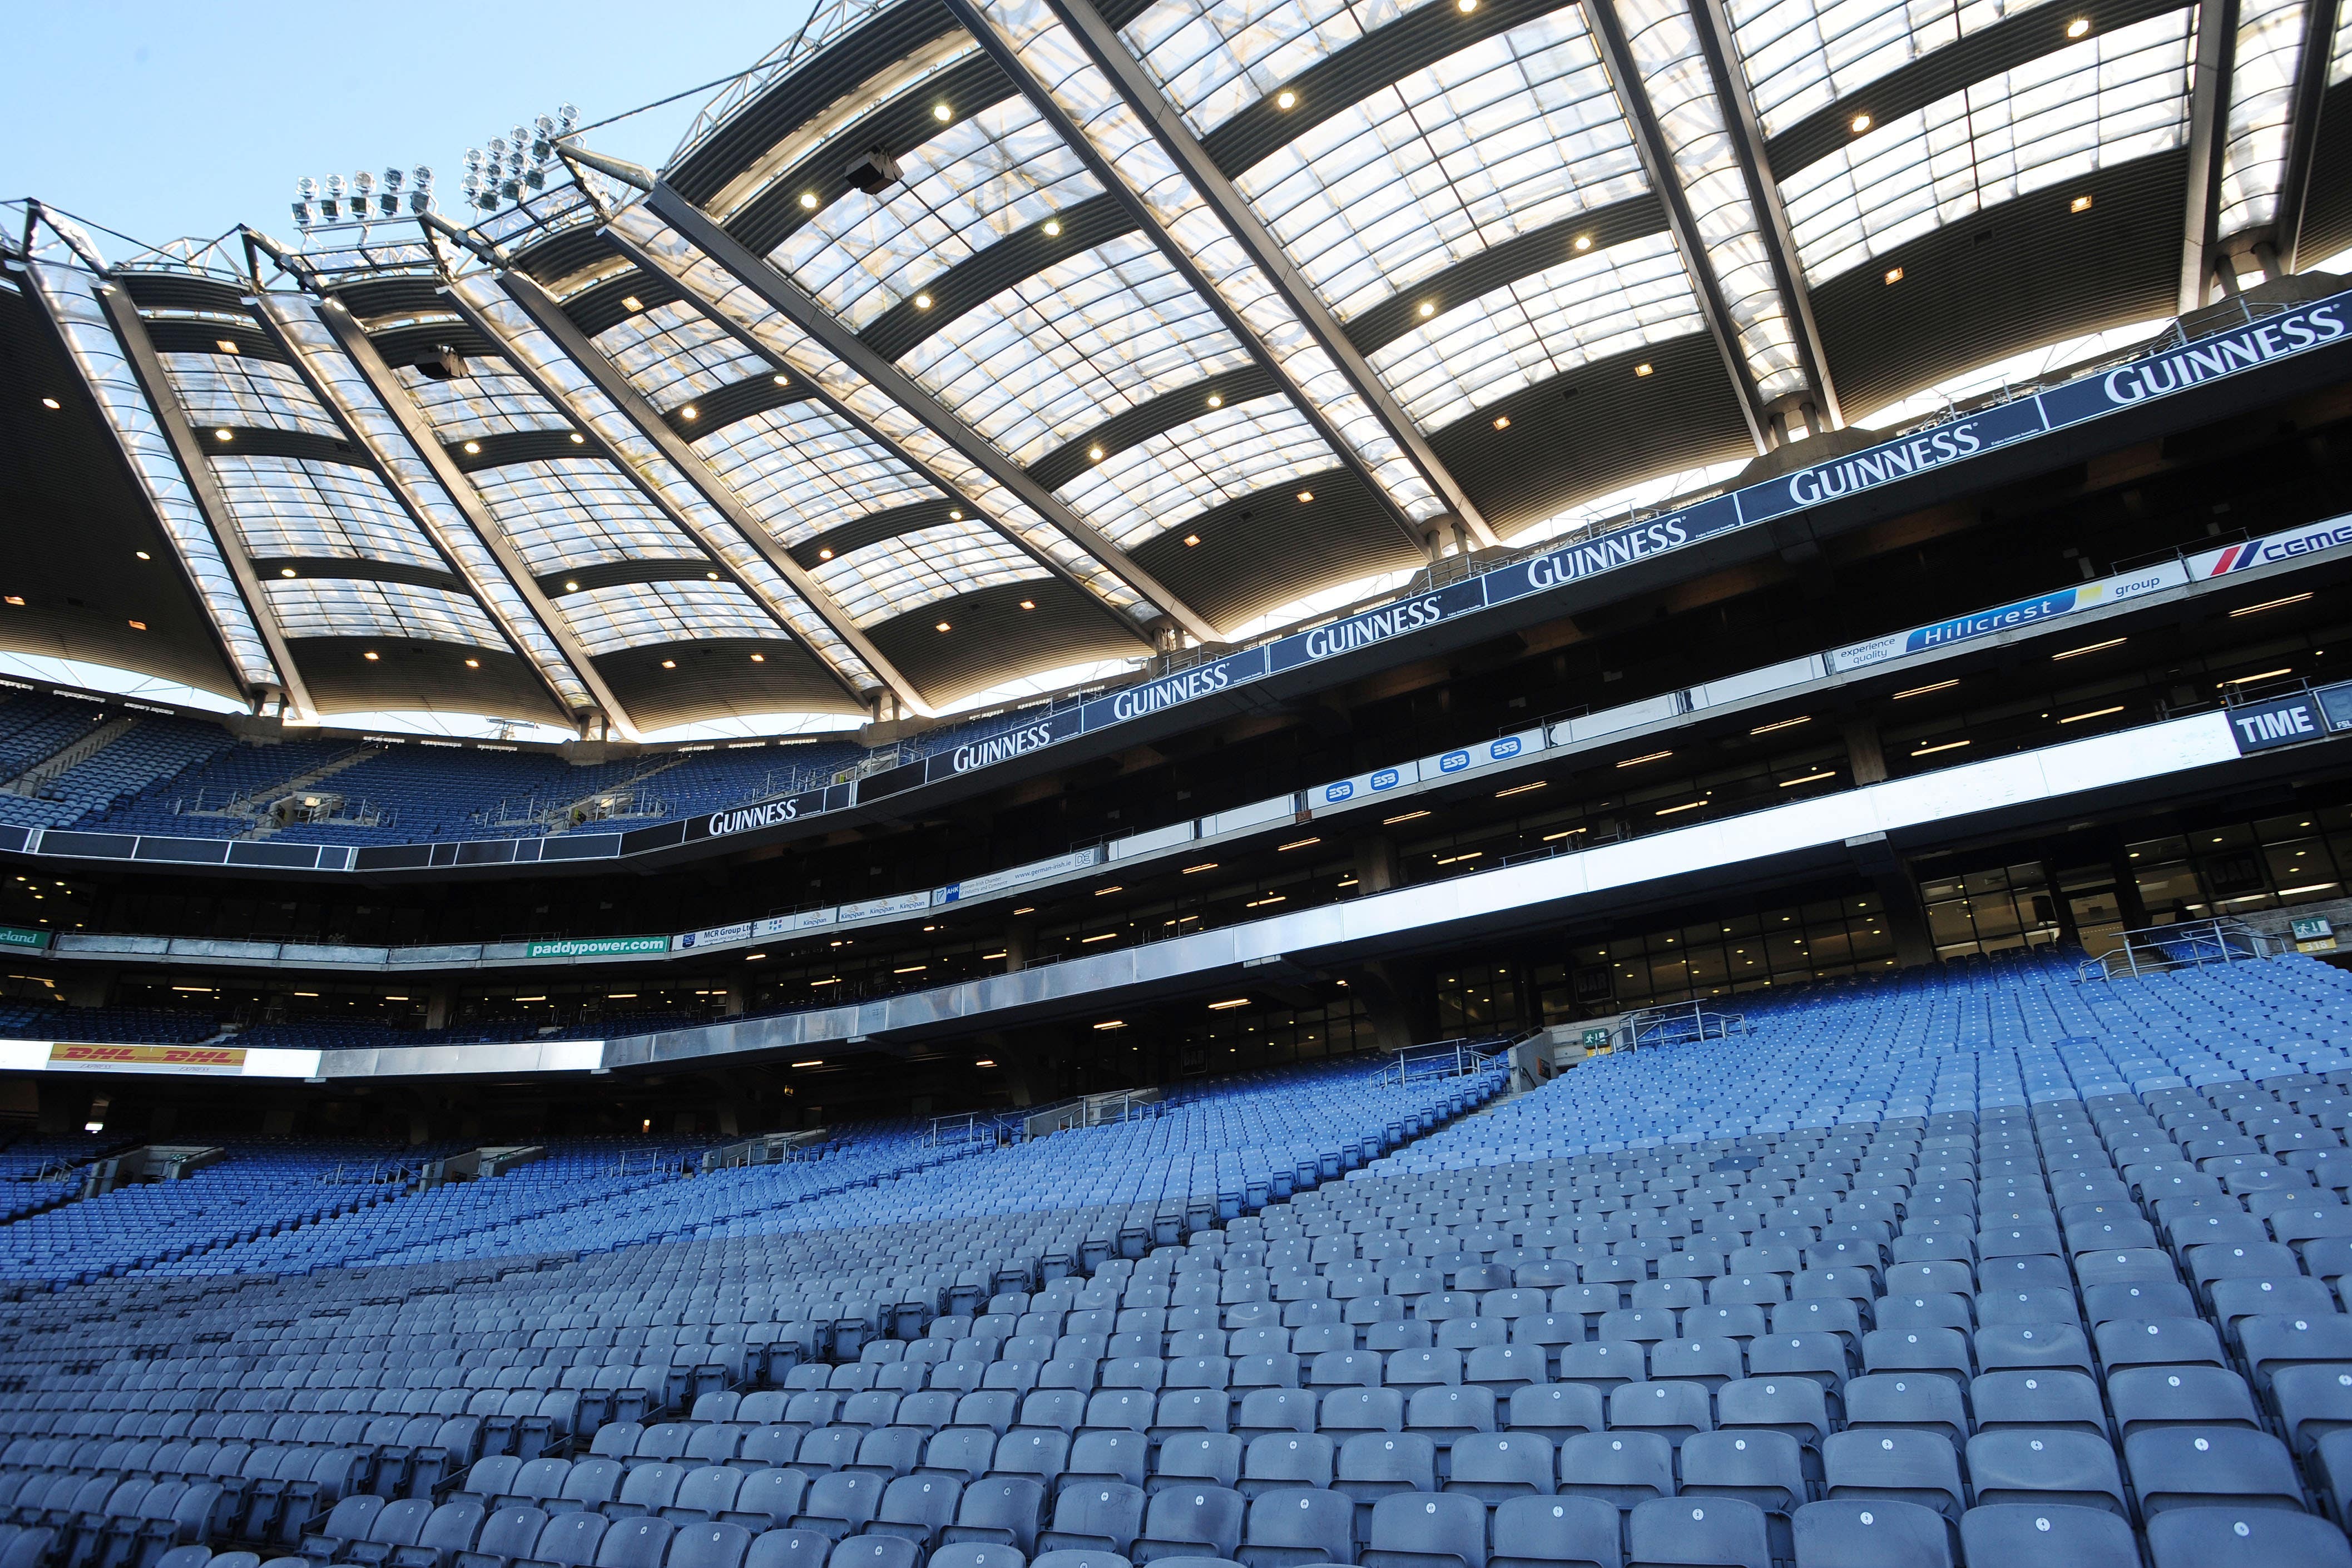 A general view showing the interior of Croke Park